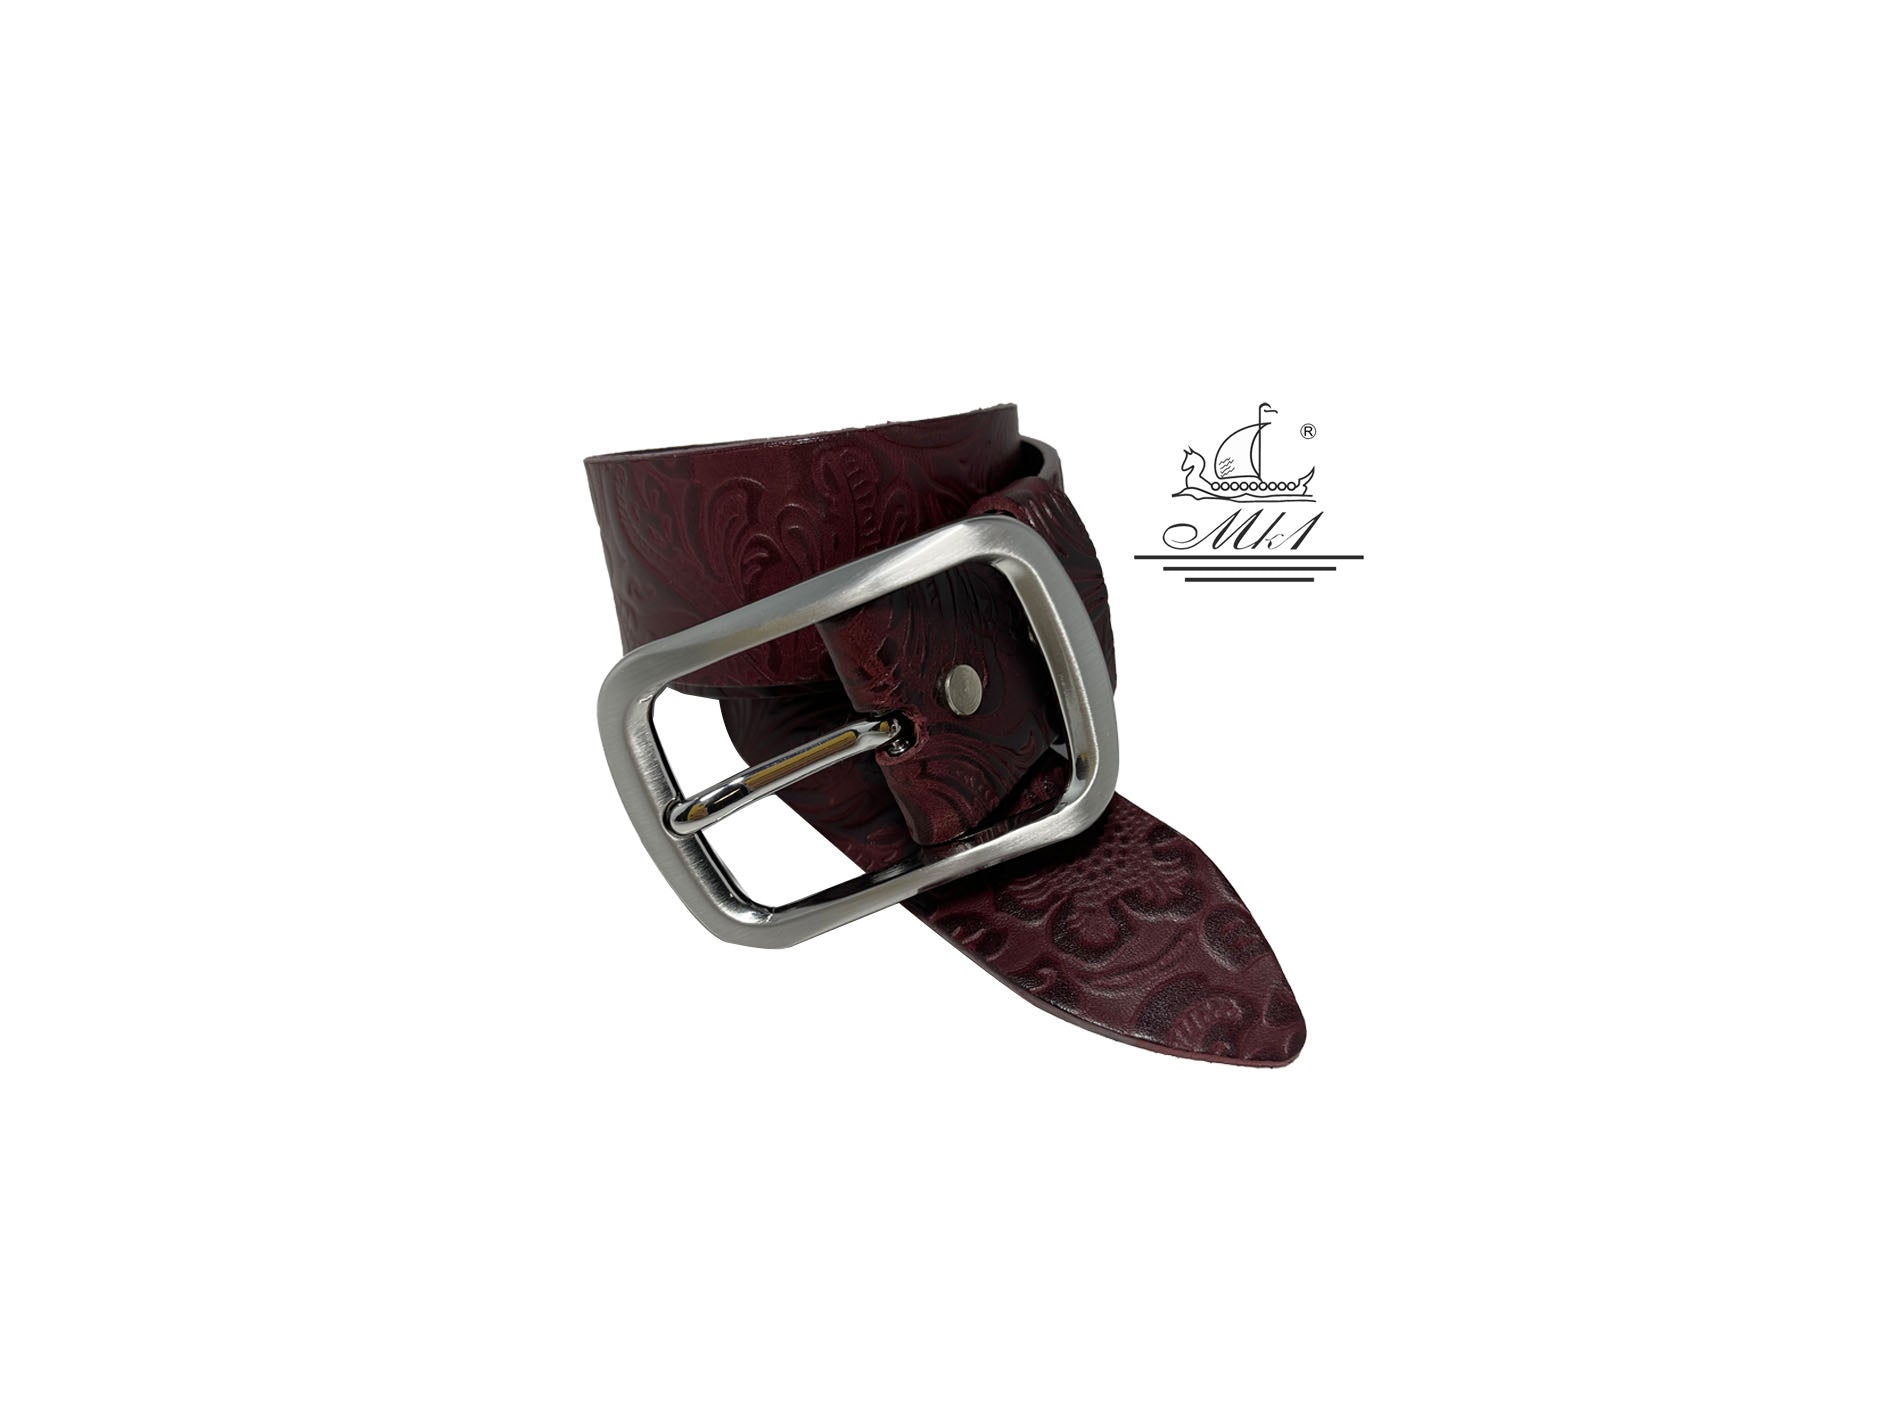 Women's 4cm wide belt handcrafted from bordo leather with flower design. 100973/40mp/LL